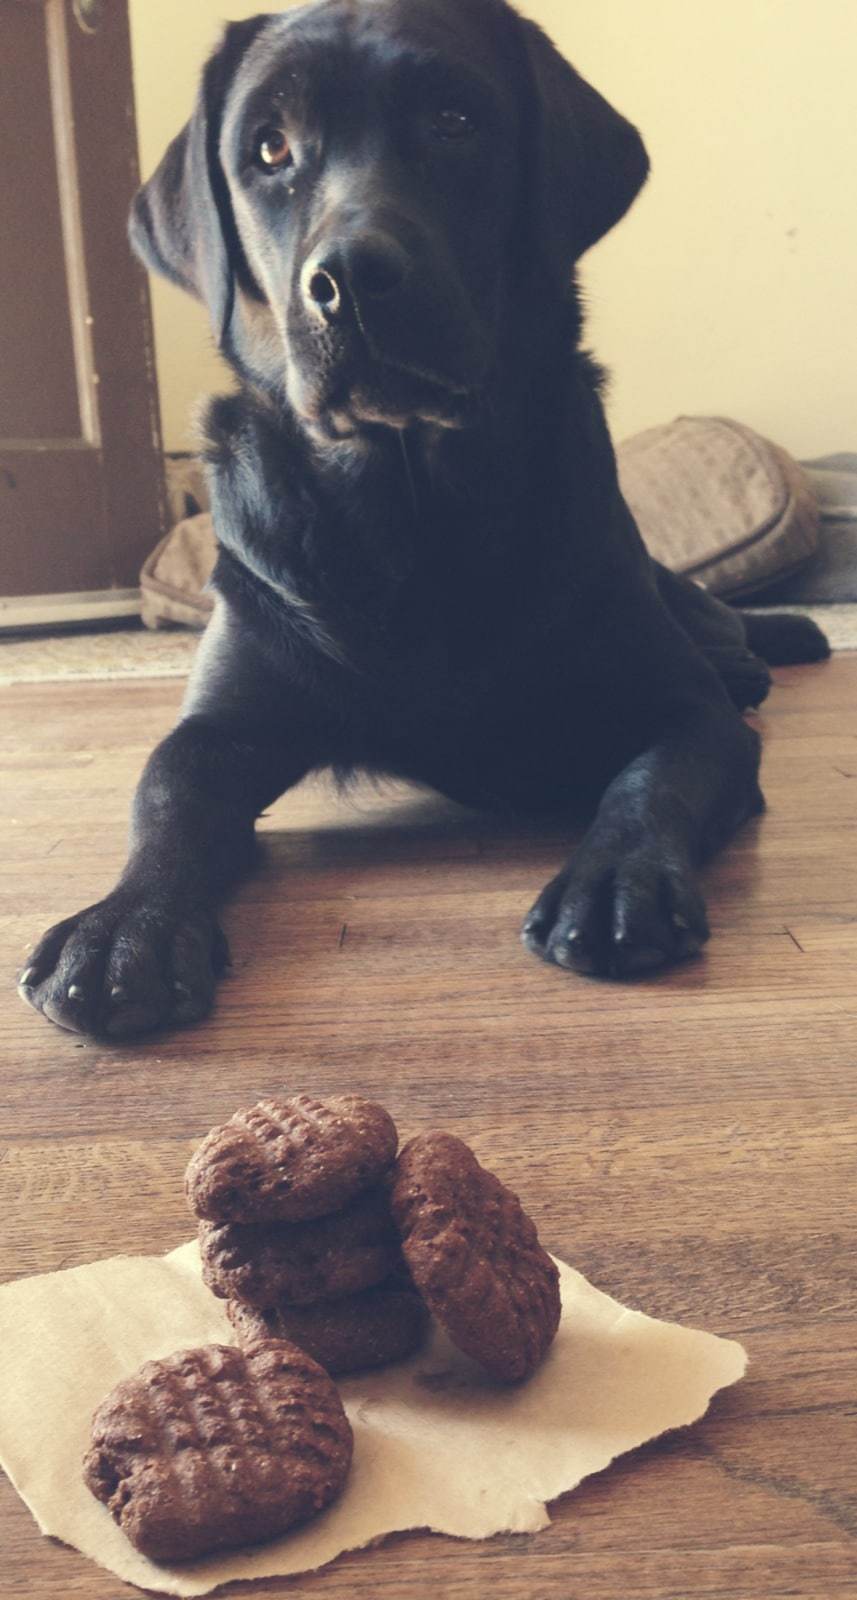 Black labrador laying in front of a pile of dog treats